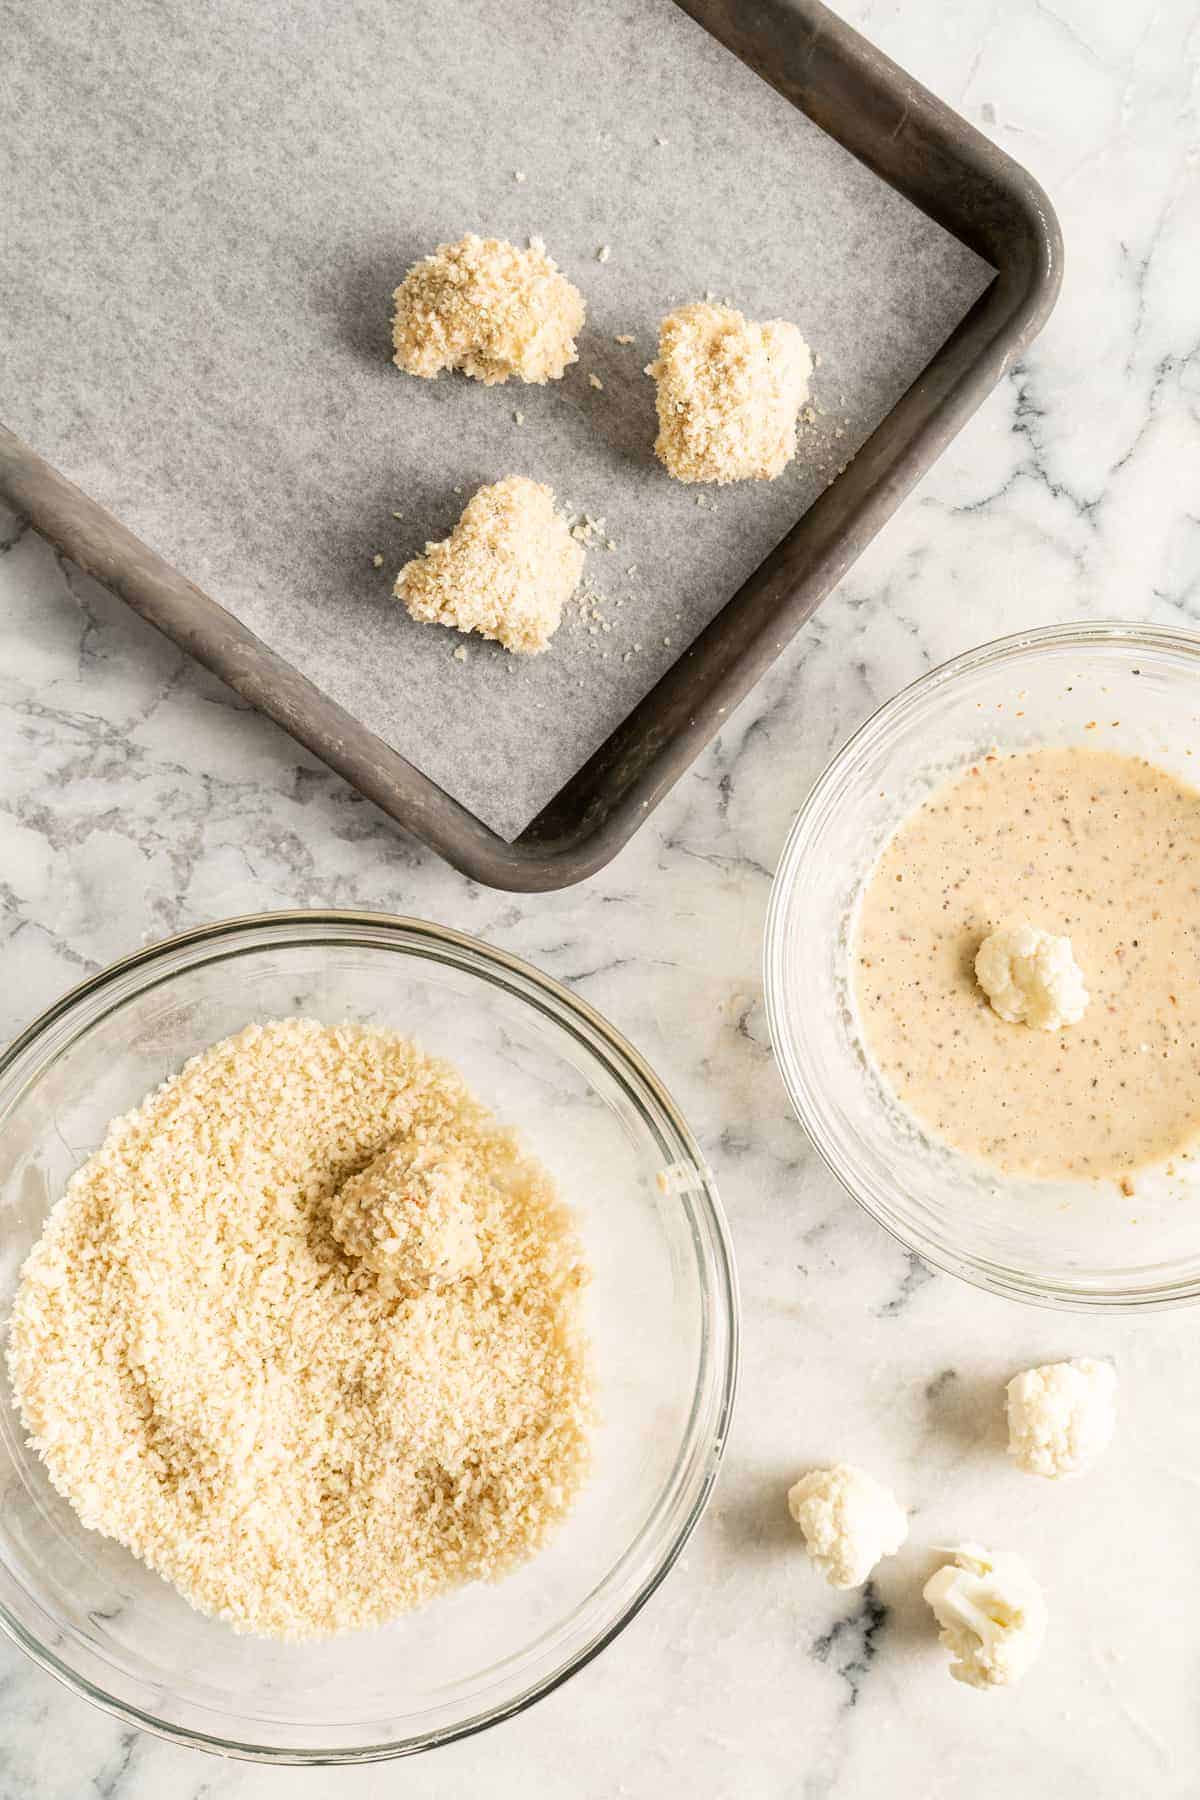 Cauliflower being dipped in bowls of batter and breadcrumbs, then placed on baking sheet